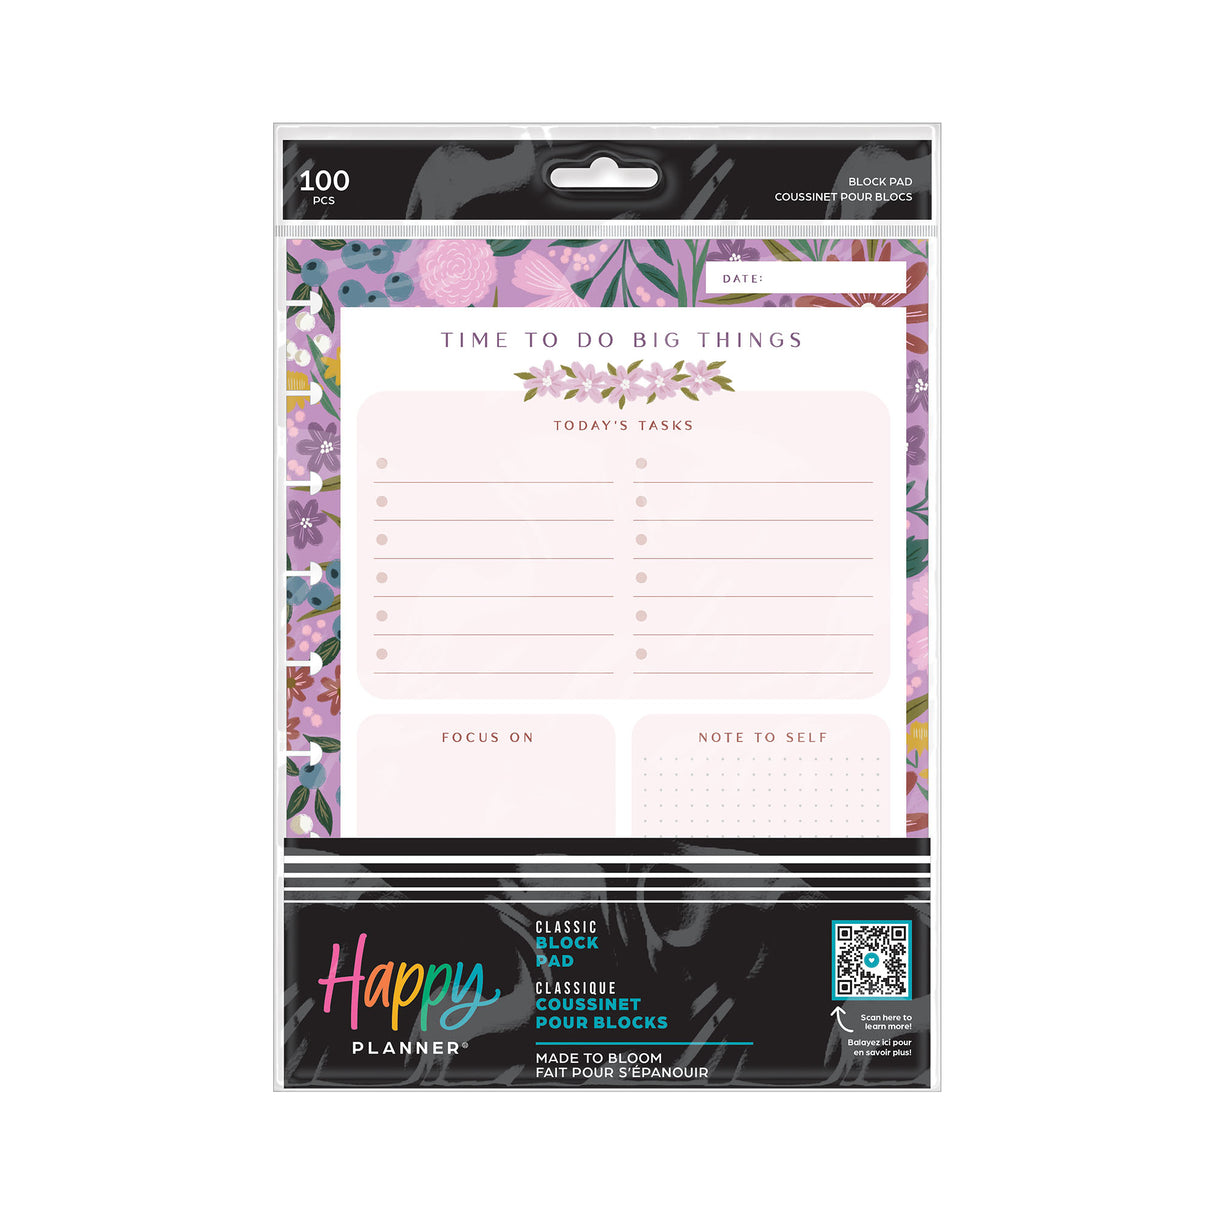 Happy Planner Made to Bloom CLASSIC Block Pad